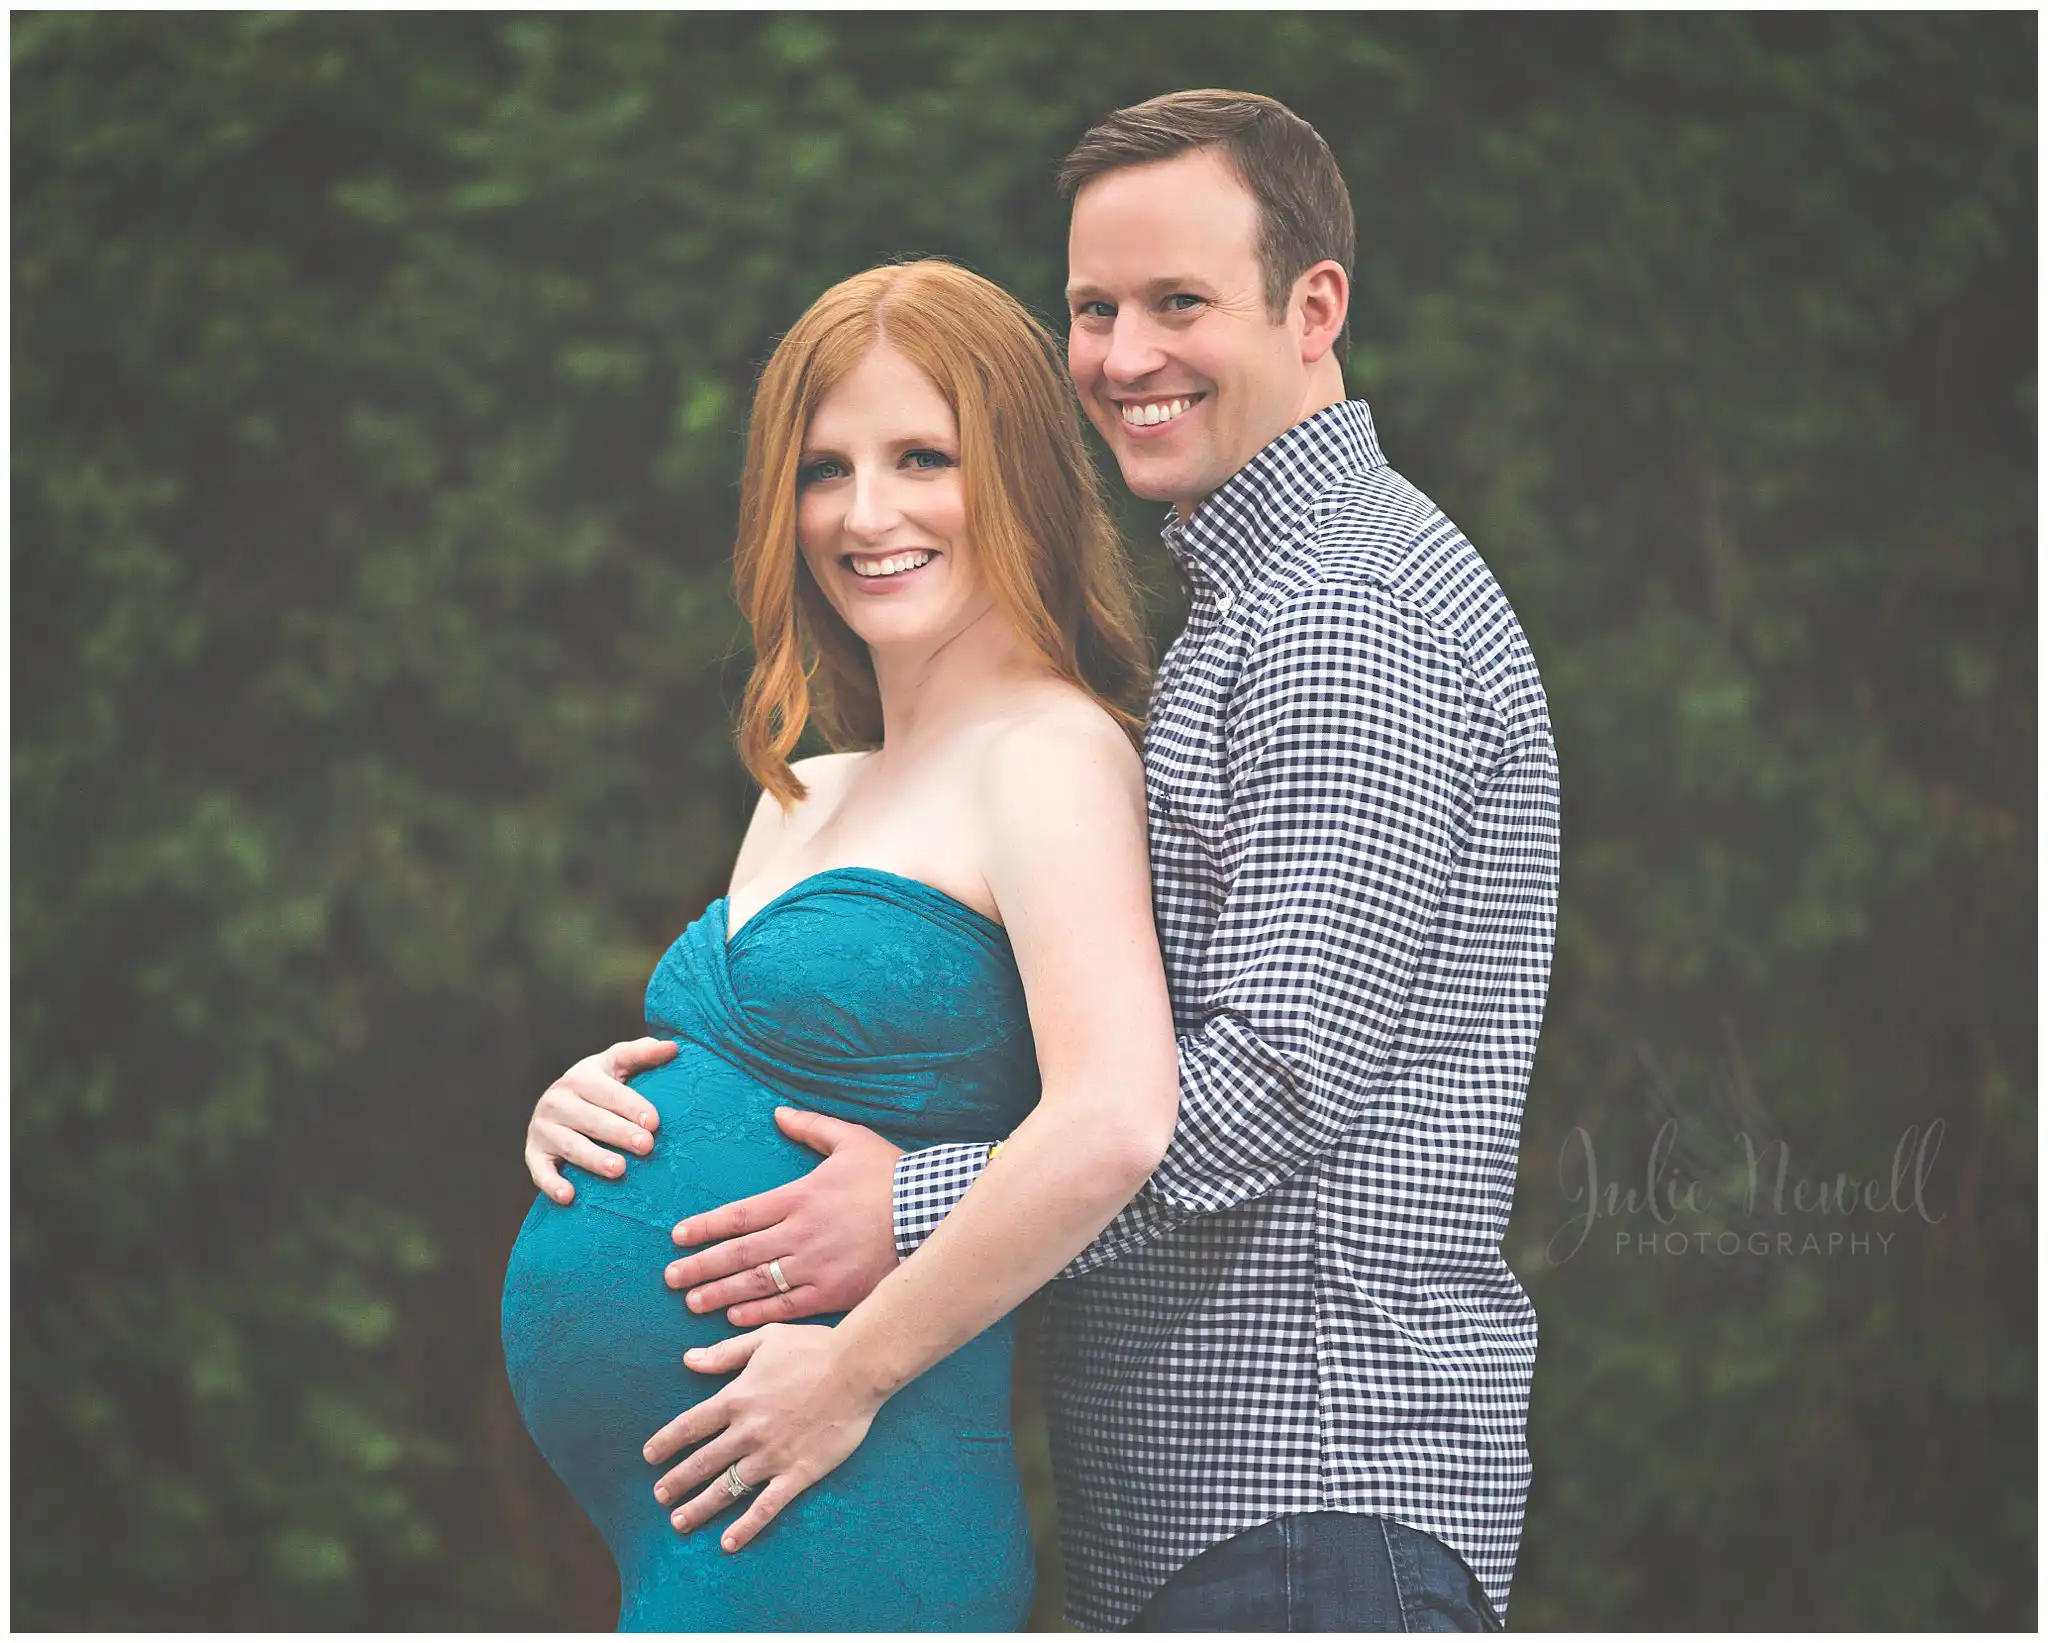 Mother Daughter Maternity Photos - Inspired By This